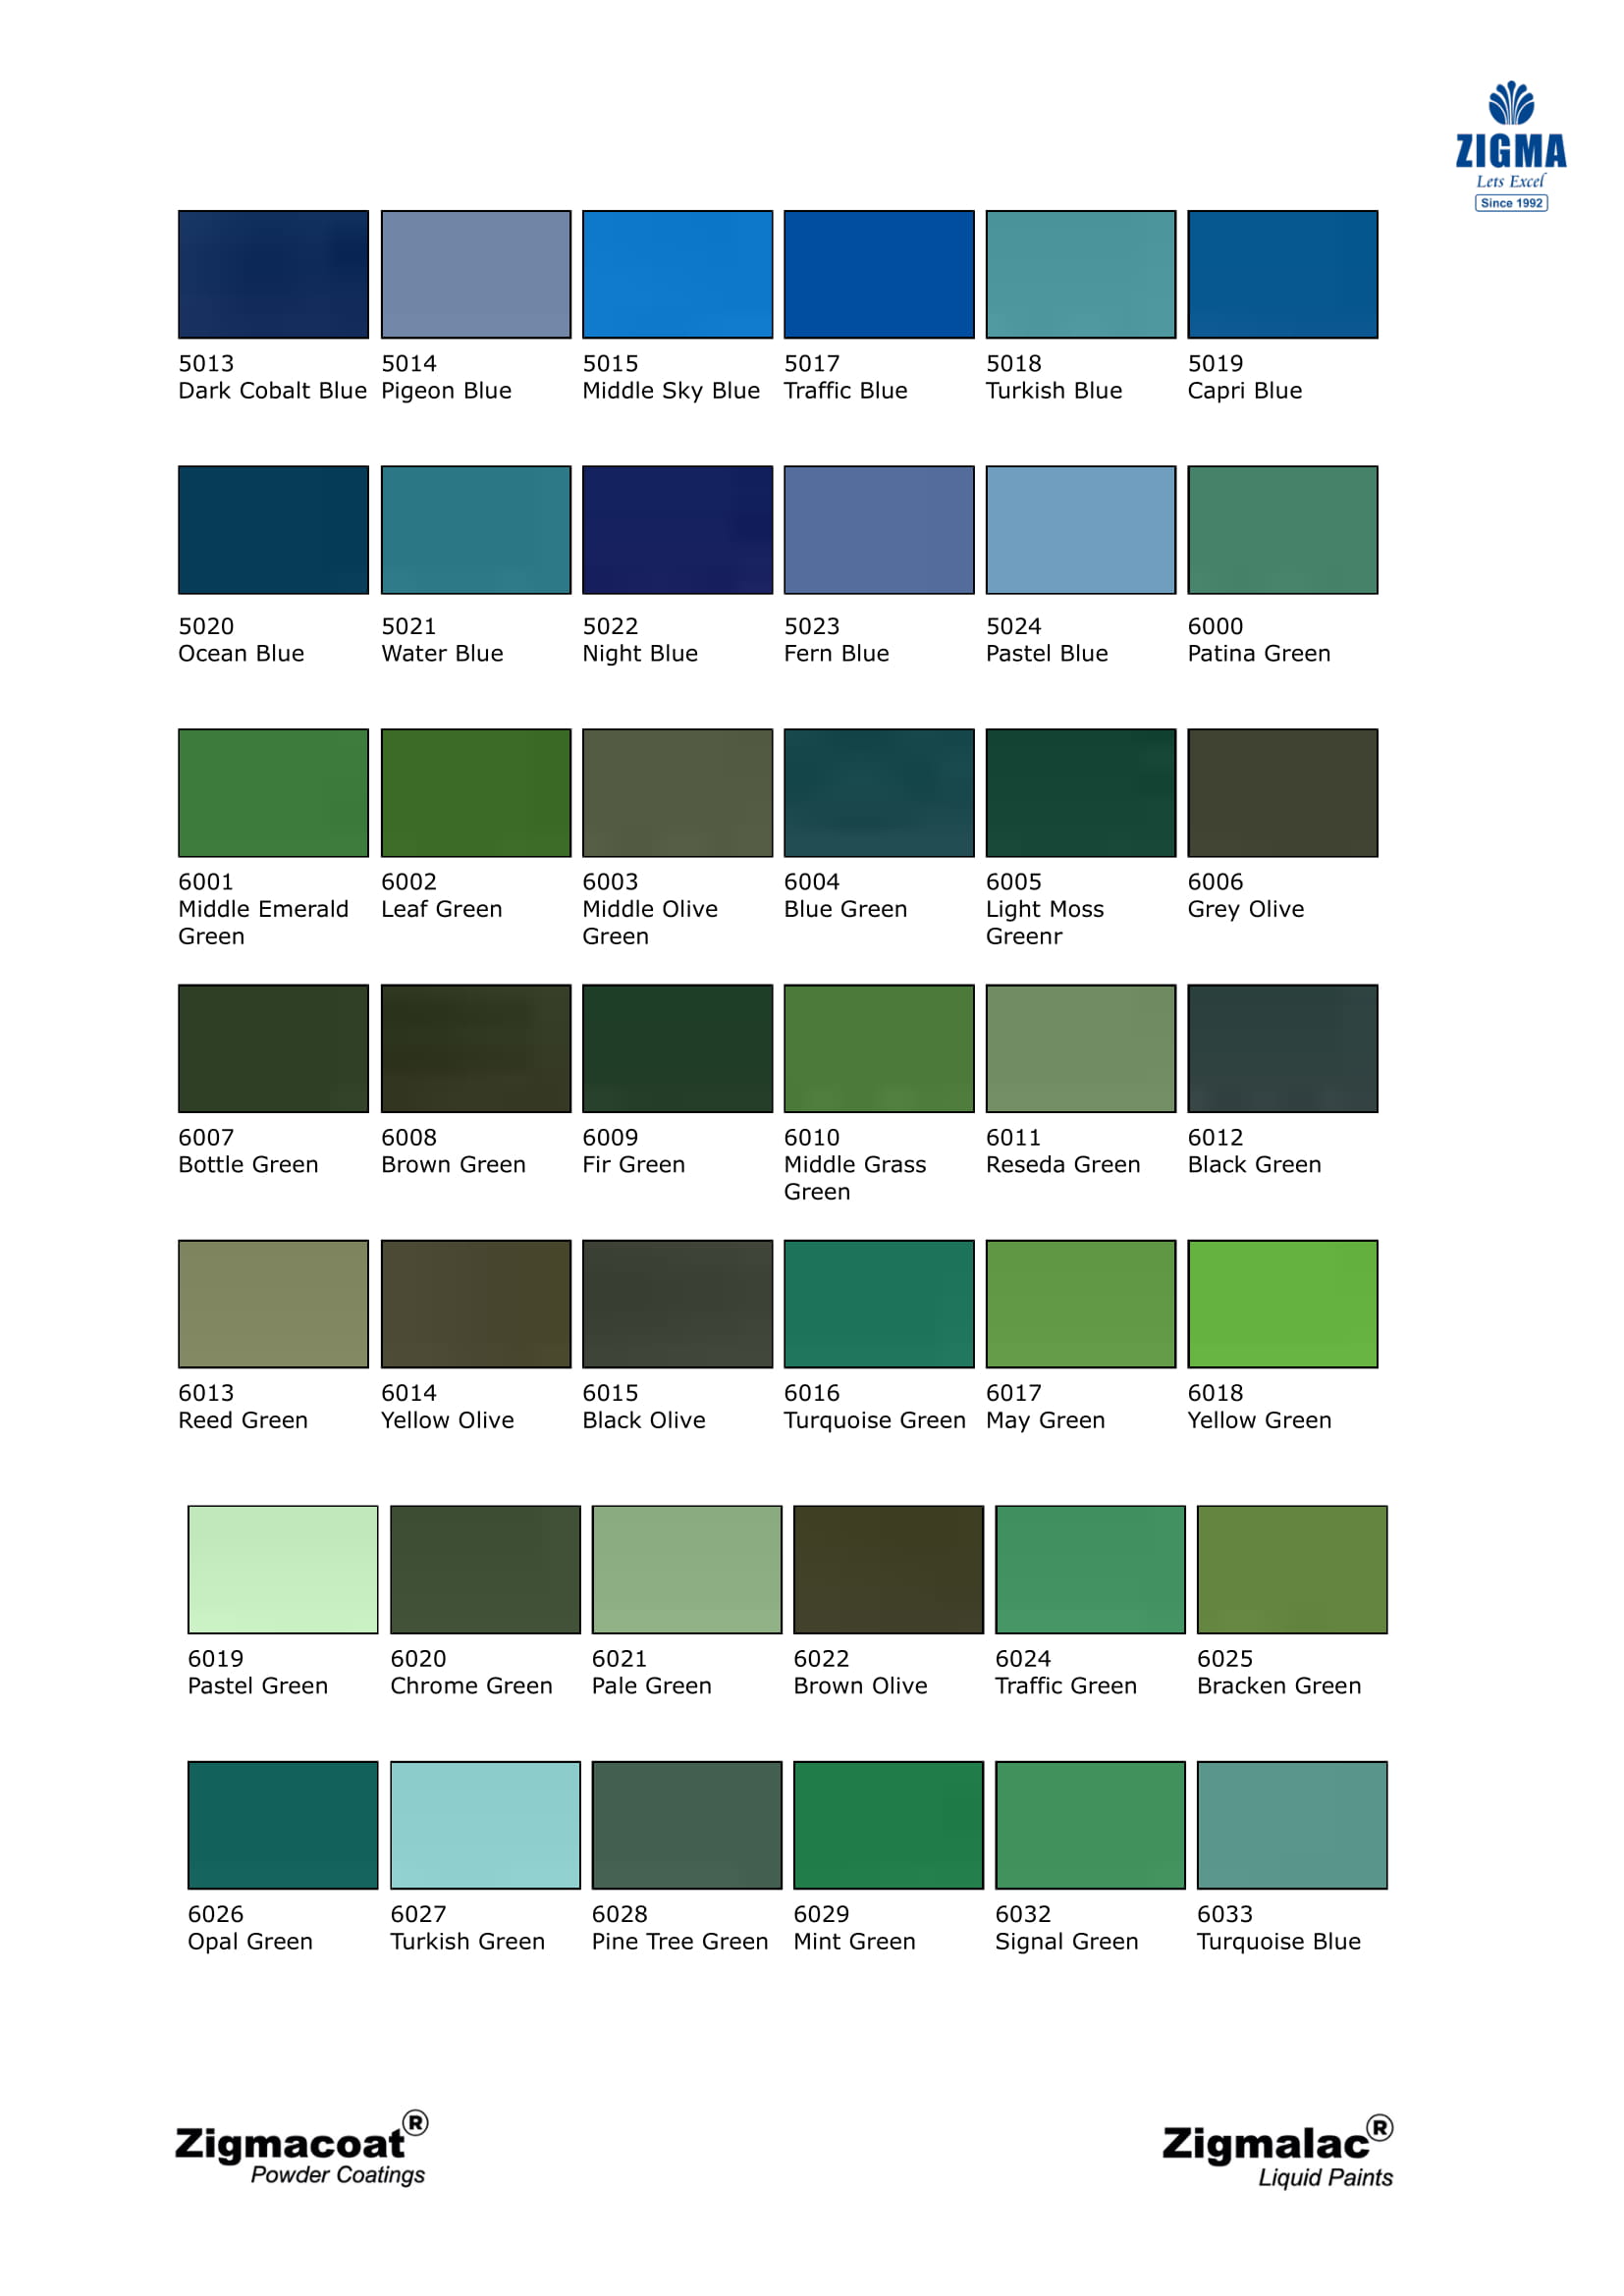 Shade Cards, Color Palette, Paint Shades